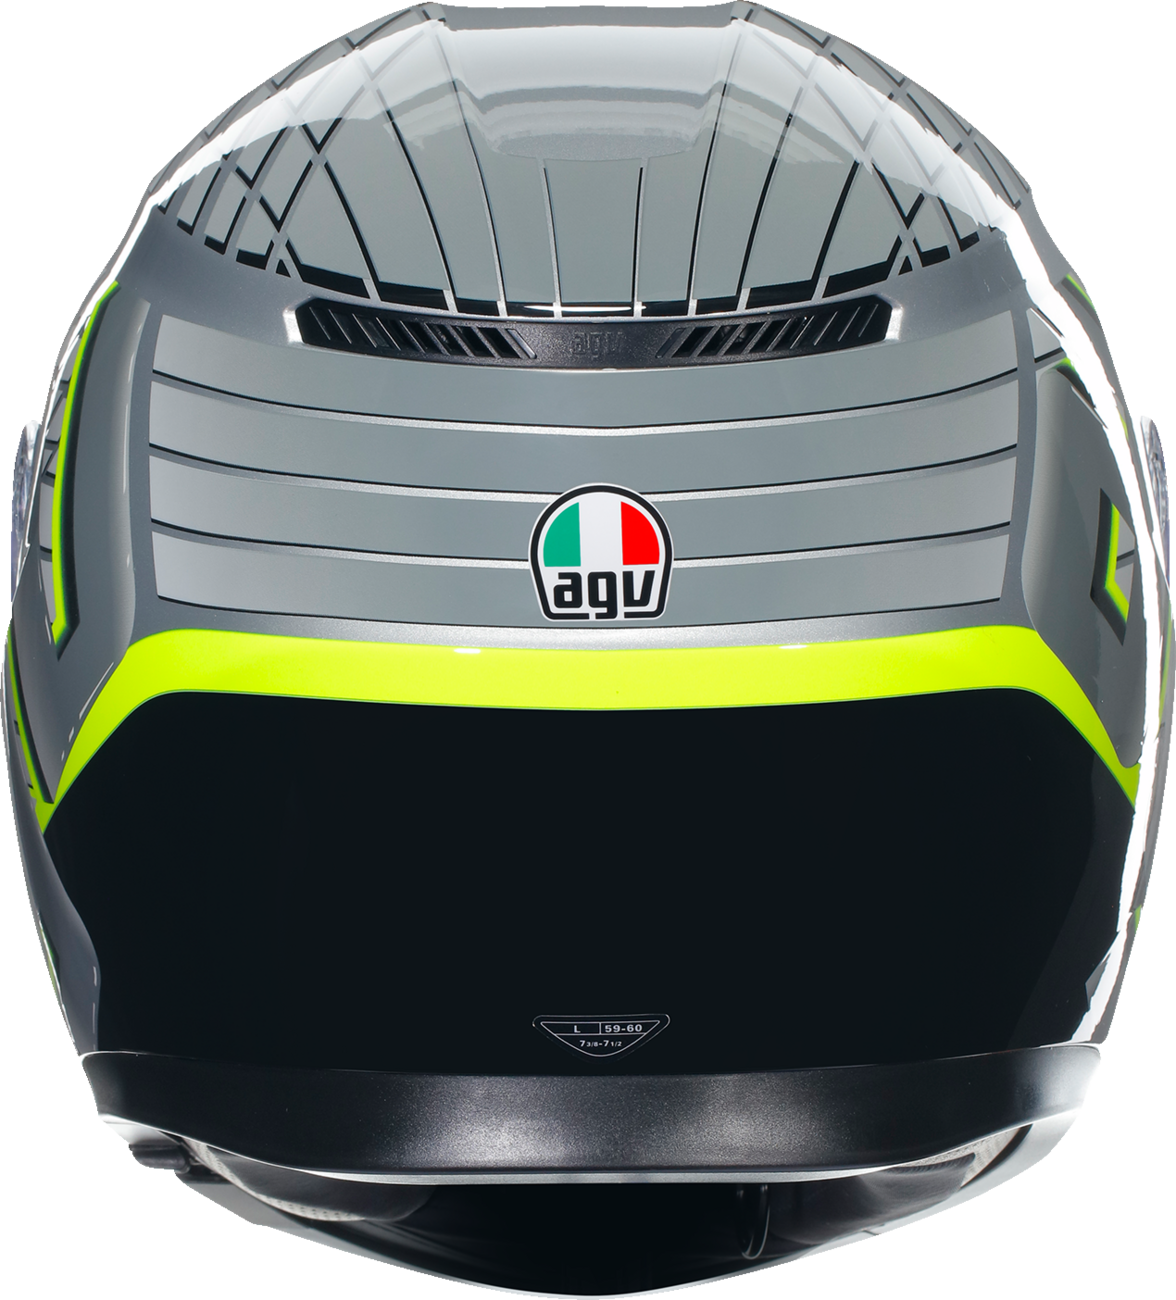 AGV K3 Helmet - Fortify - Gray/Black/Yellow Fluo - Large 2118381004011L